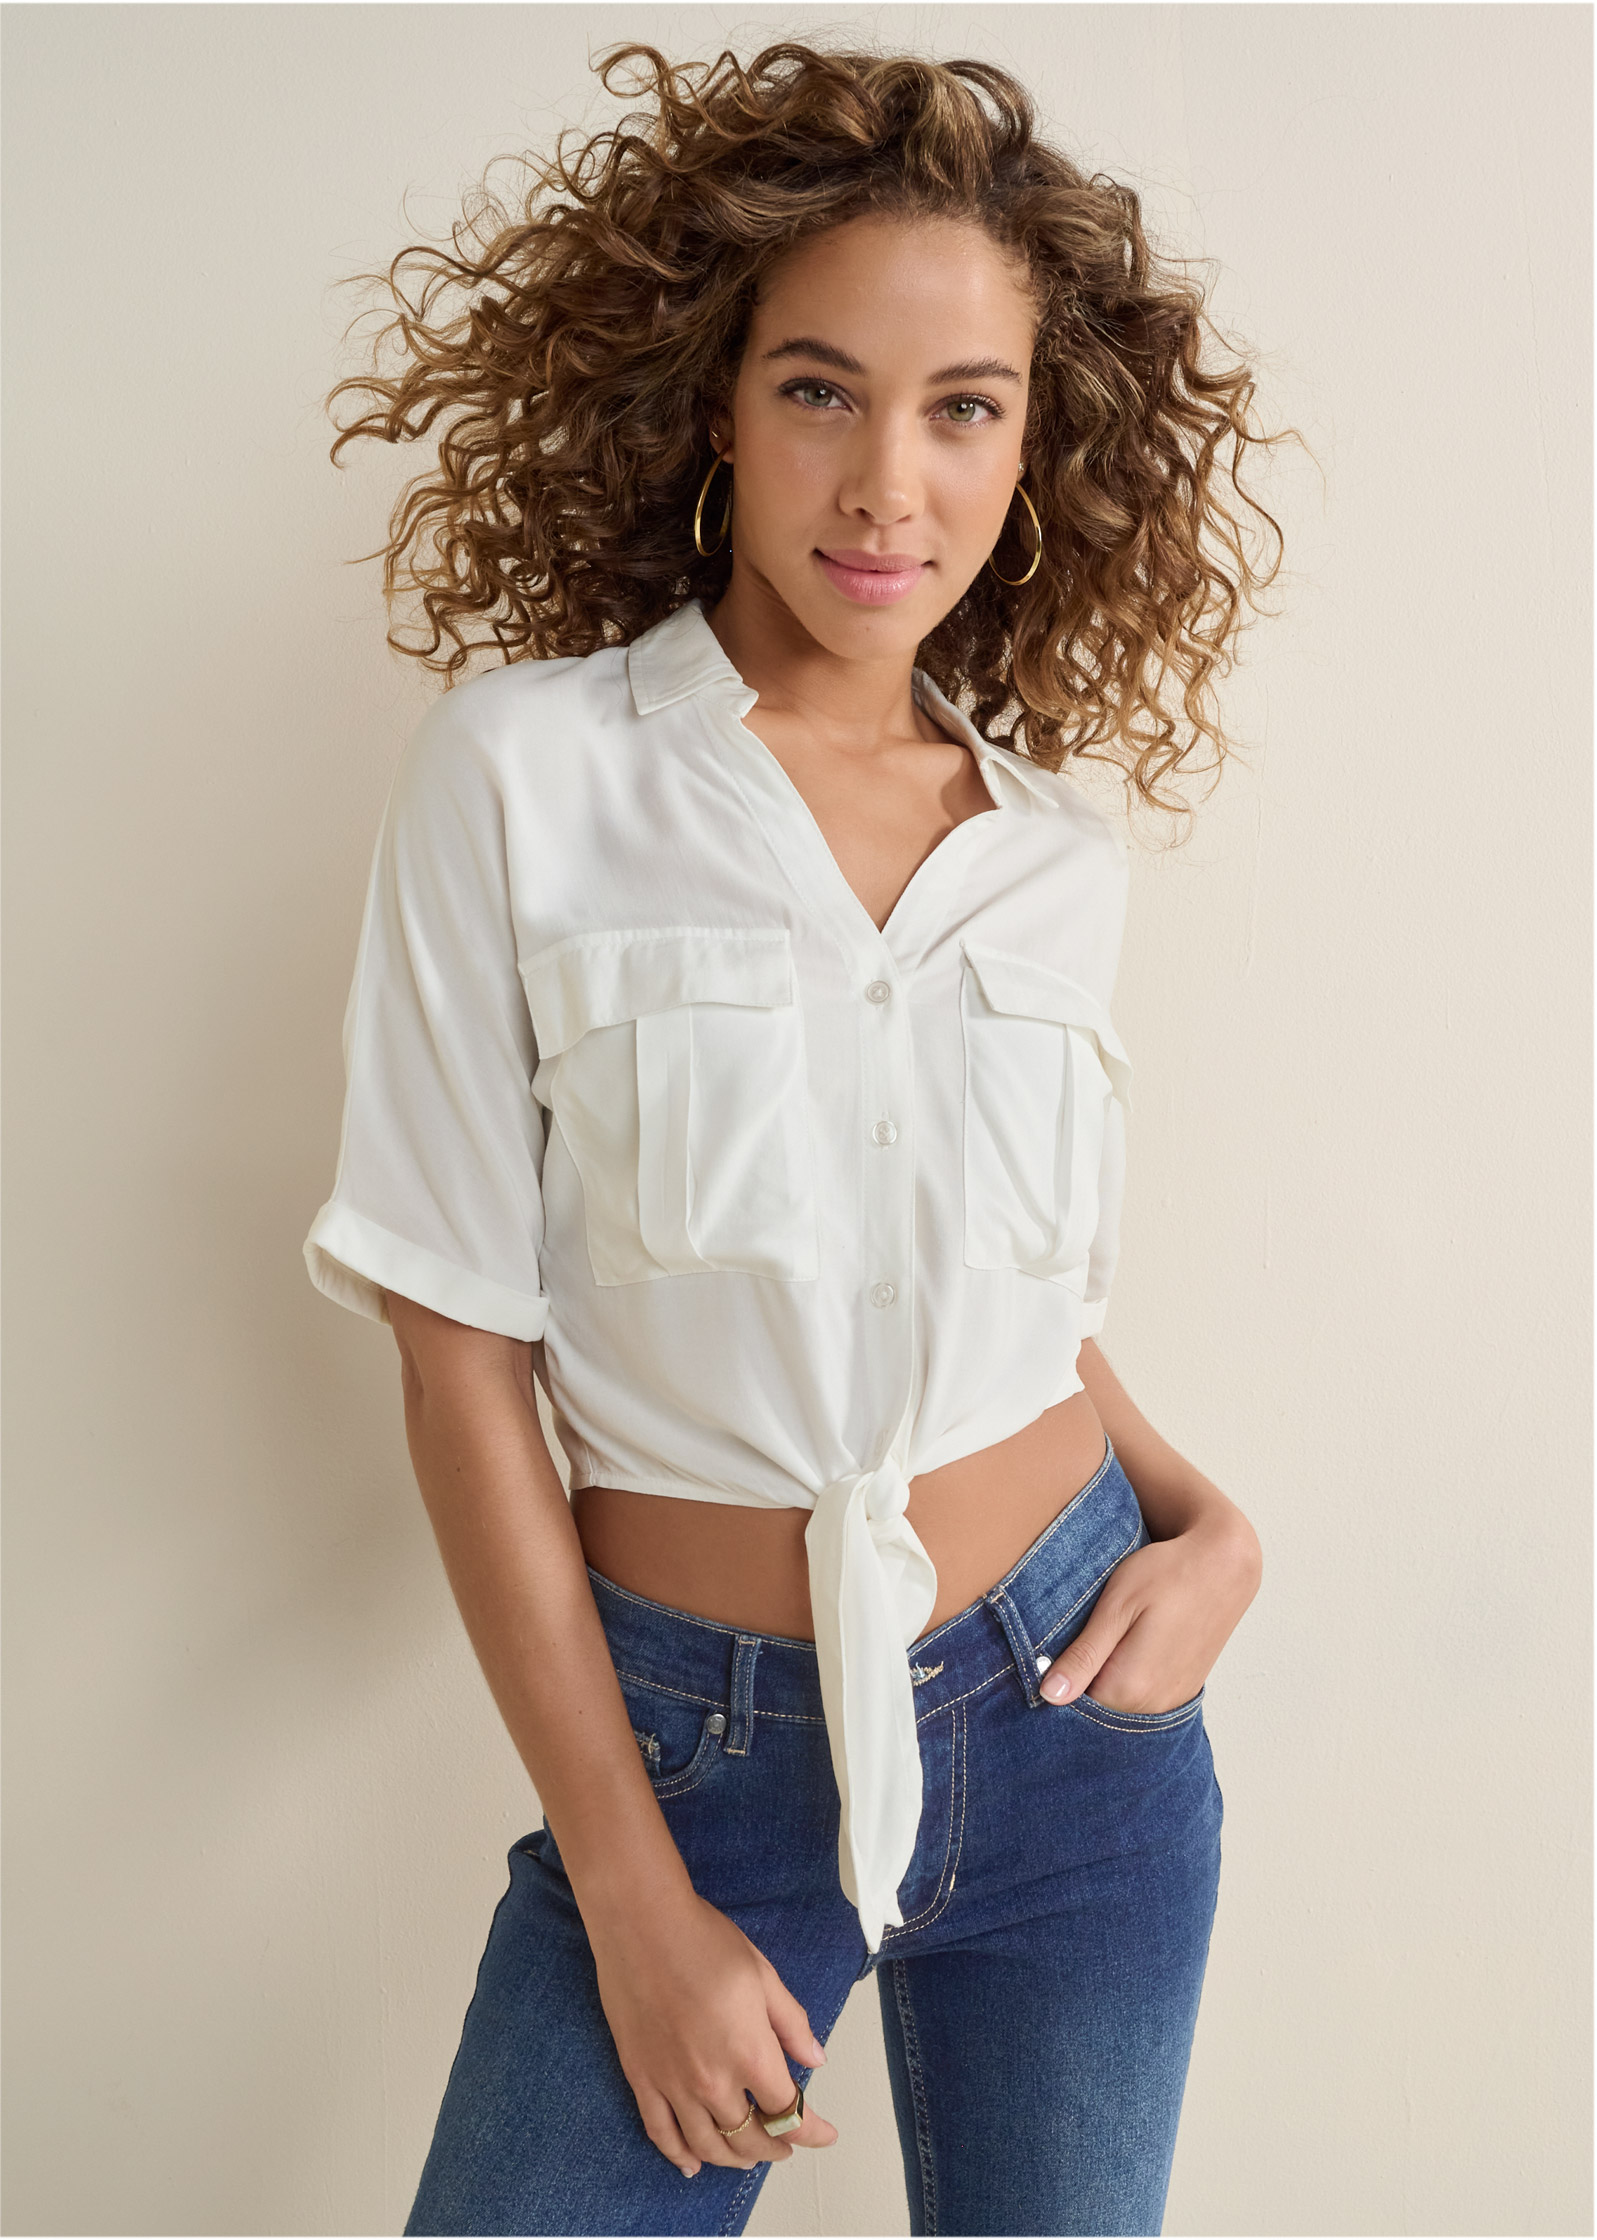 CROPPED BUTTON-UP TOP in White | VENUS